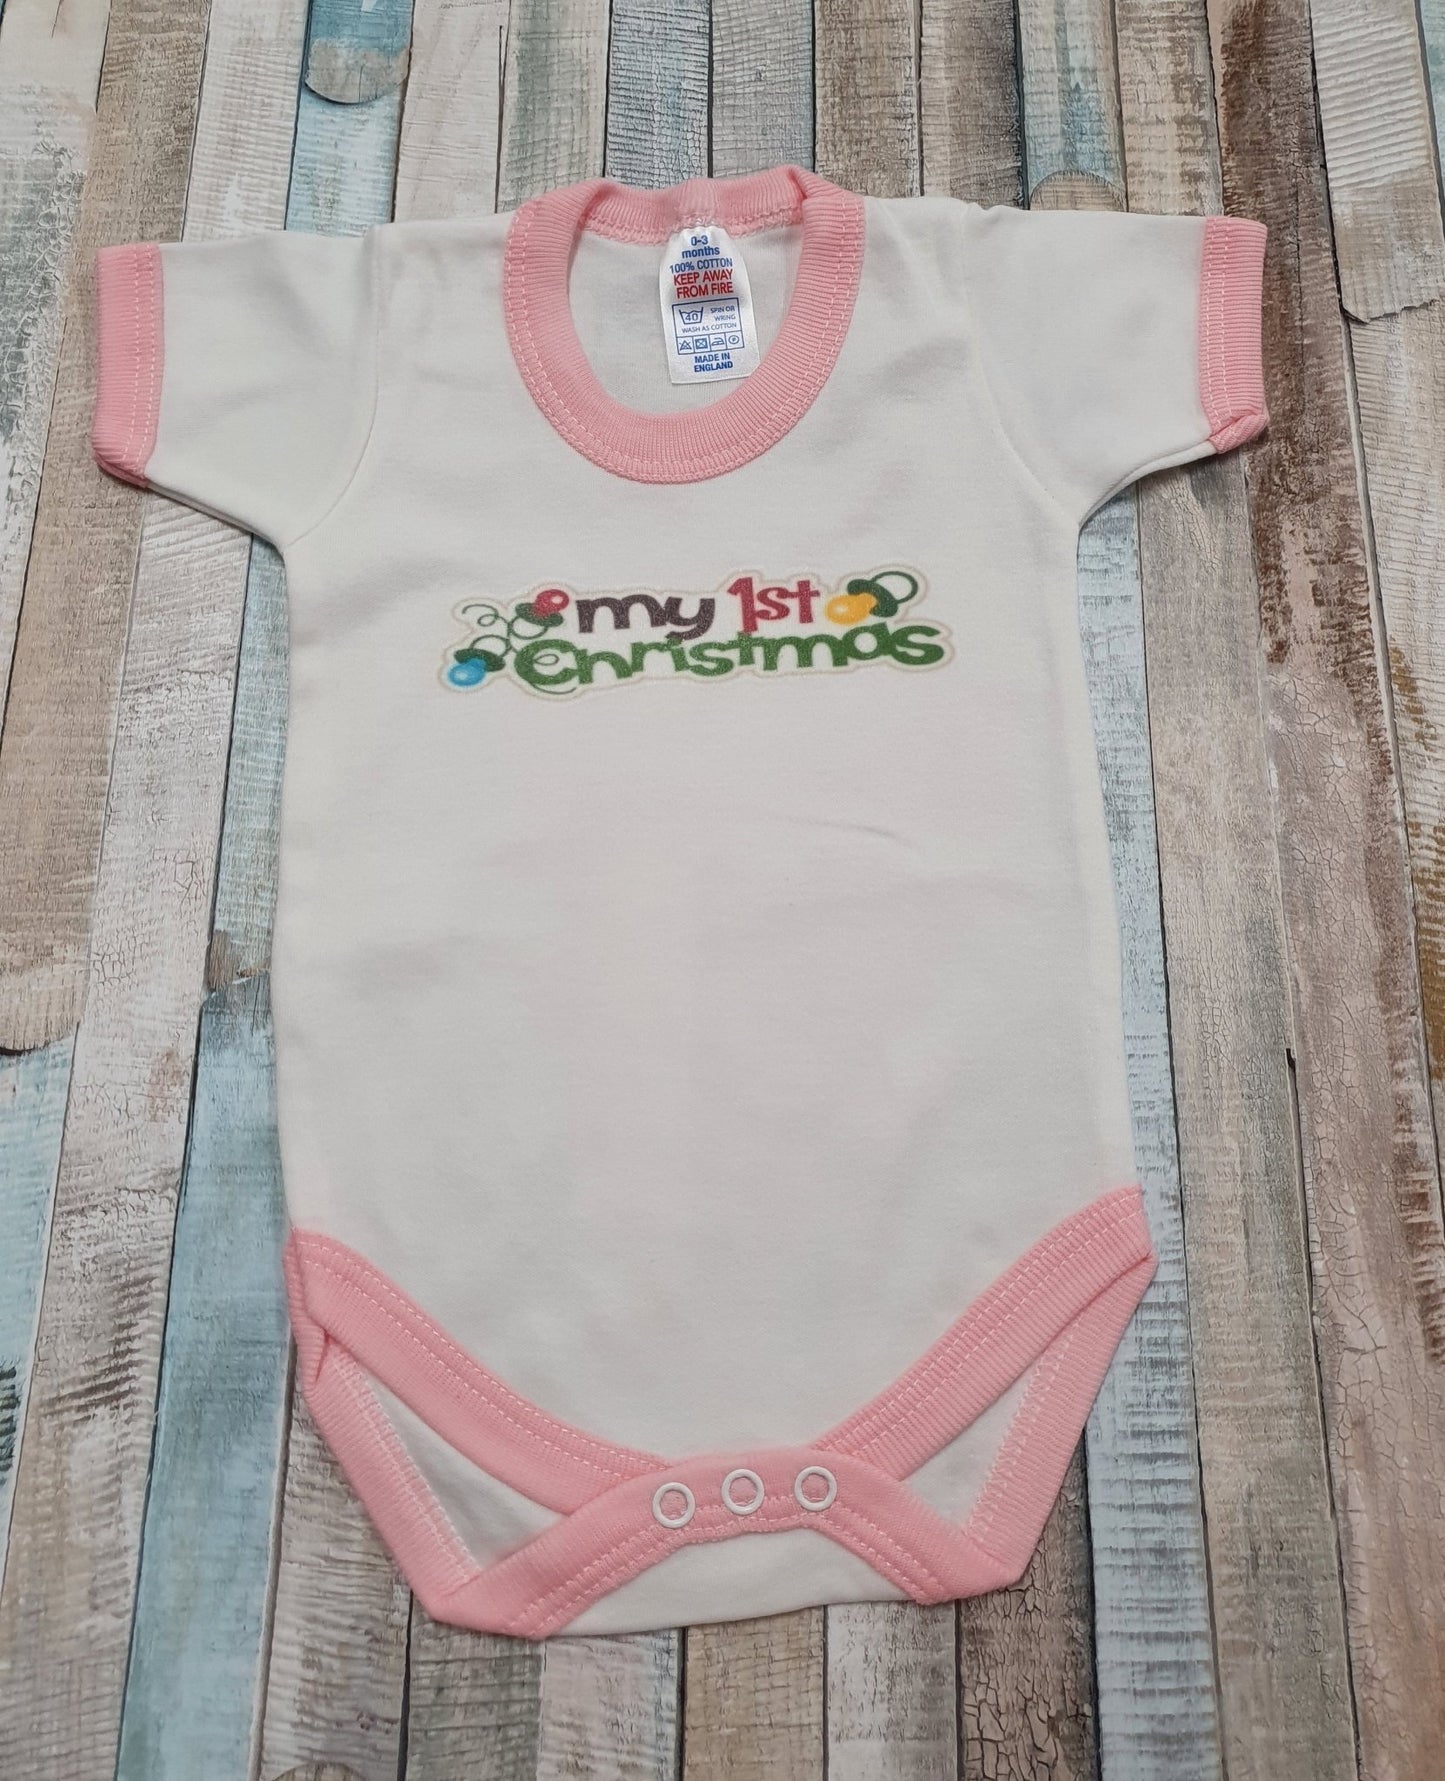 My First Christmas Vest - Nana B Baby & Childrenswear Boutique